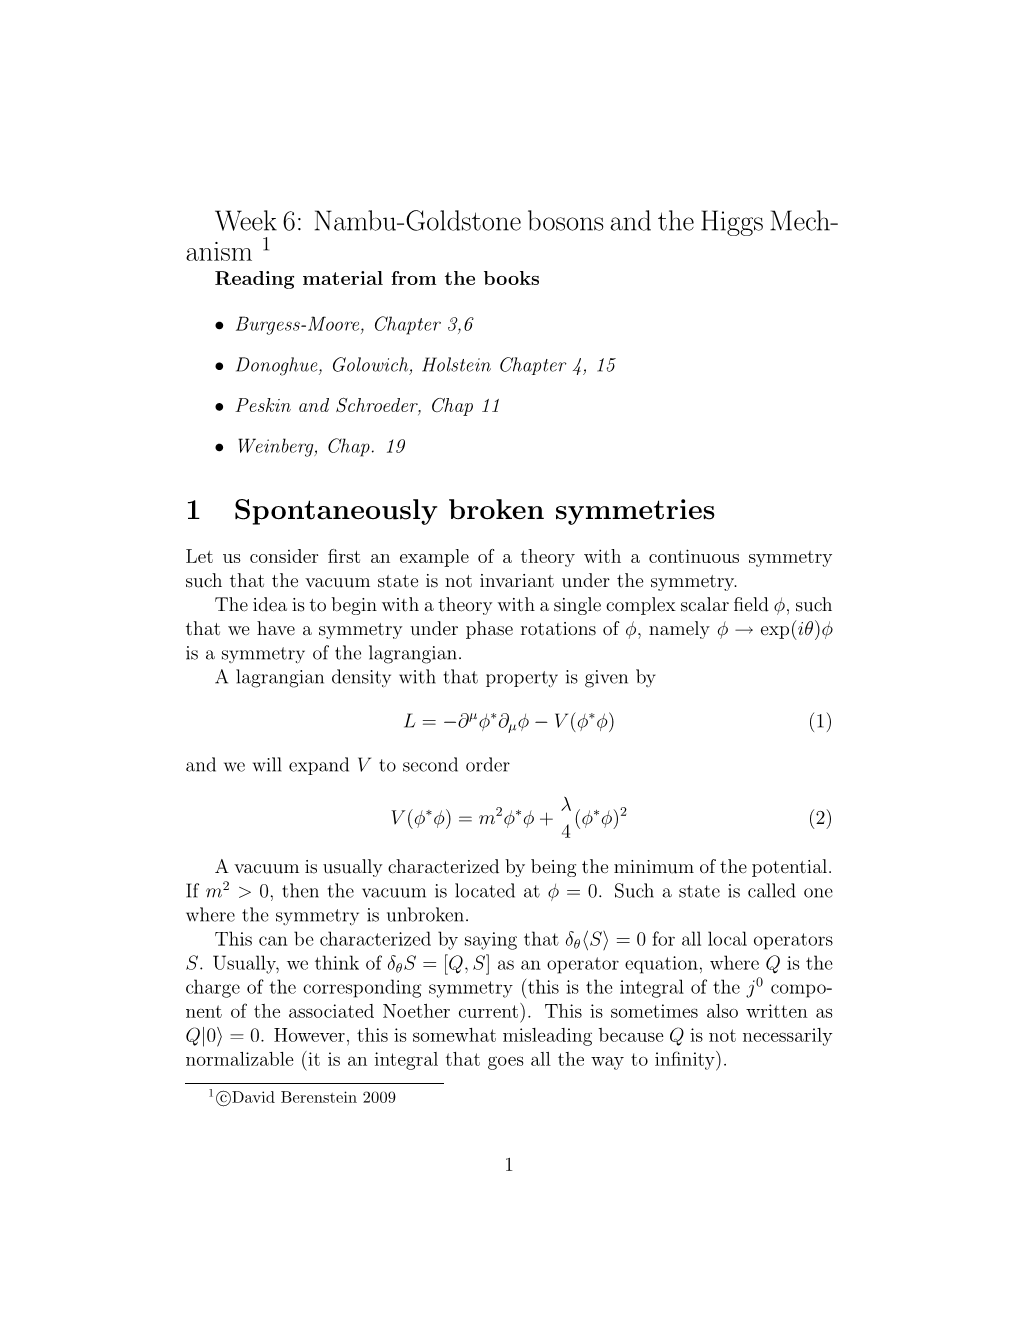 Nambu-Goldstone Bosons and the Higgs Mech- Anism 1 Reading Material from the Books